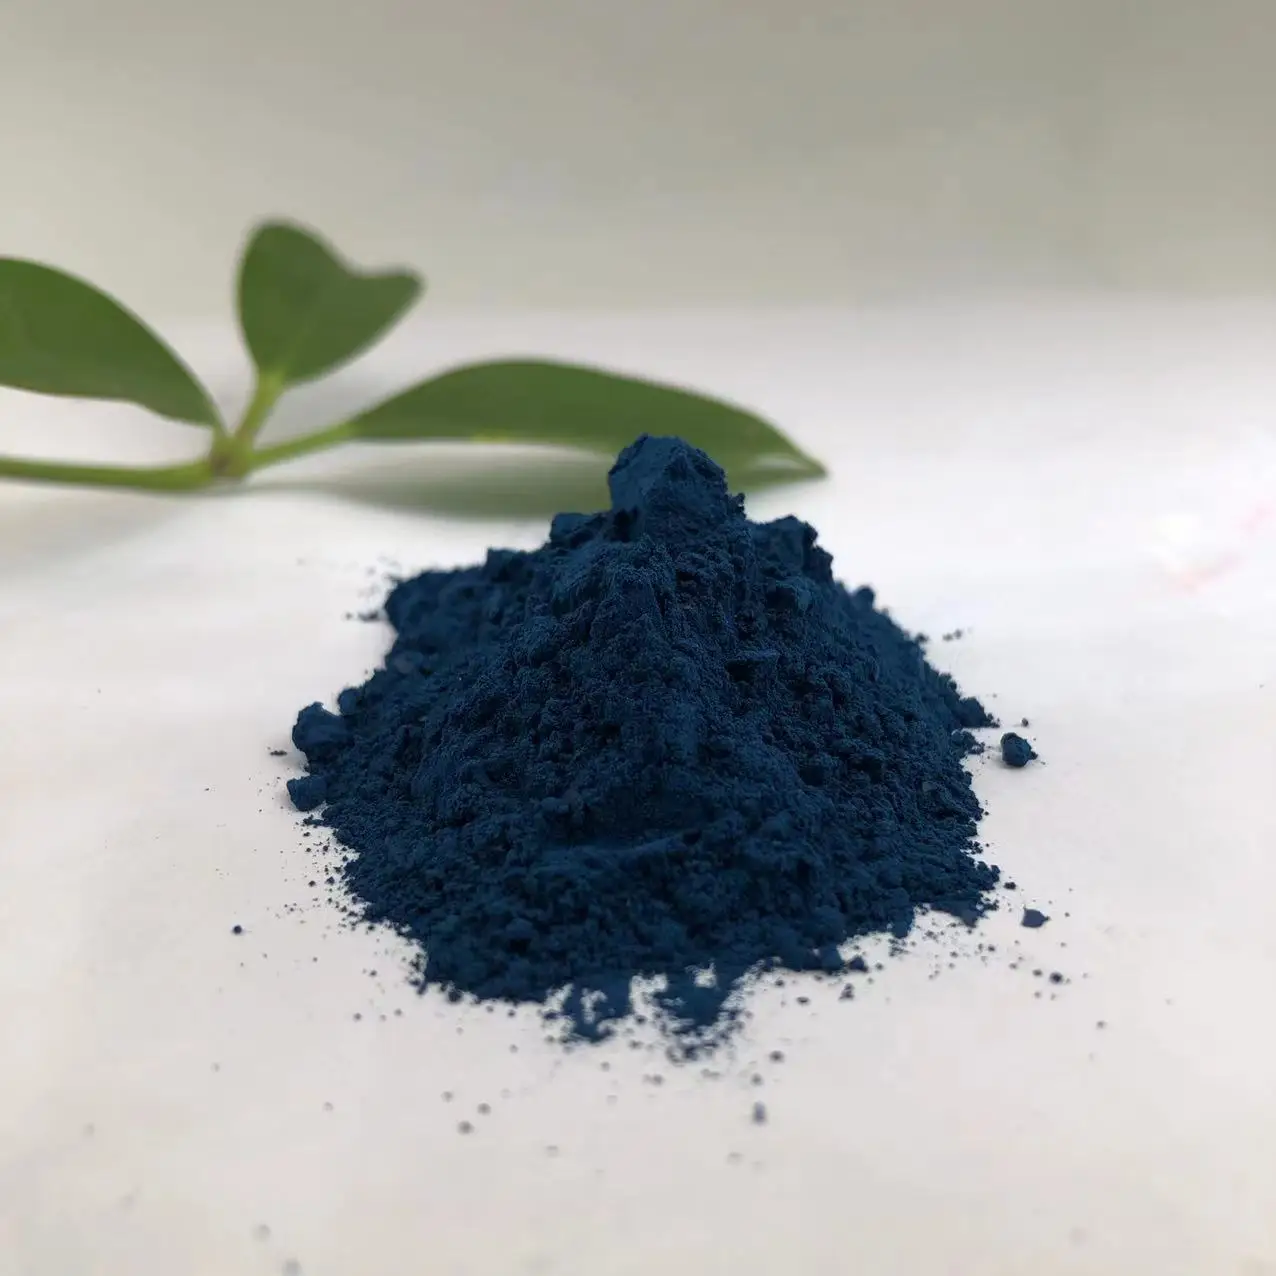 buy synthetic iron oxide pigment red for brick/313 iron oxide yellow price/iron oxide fe3o4 for sell